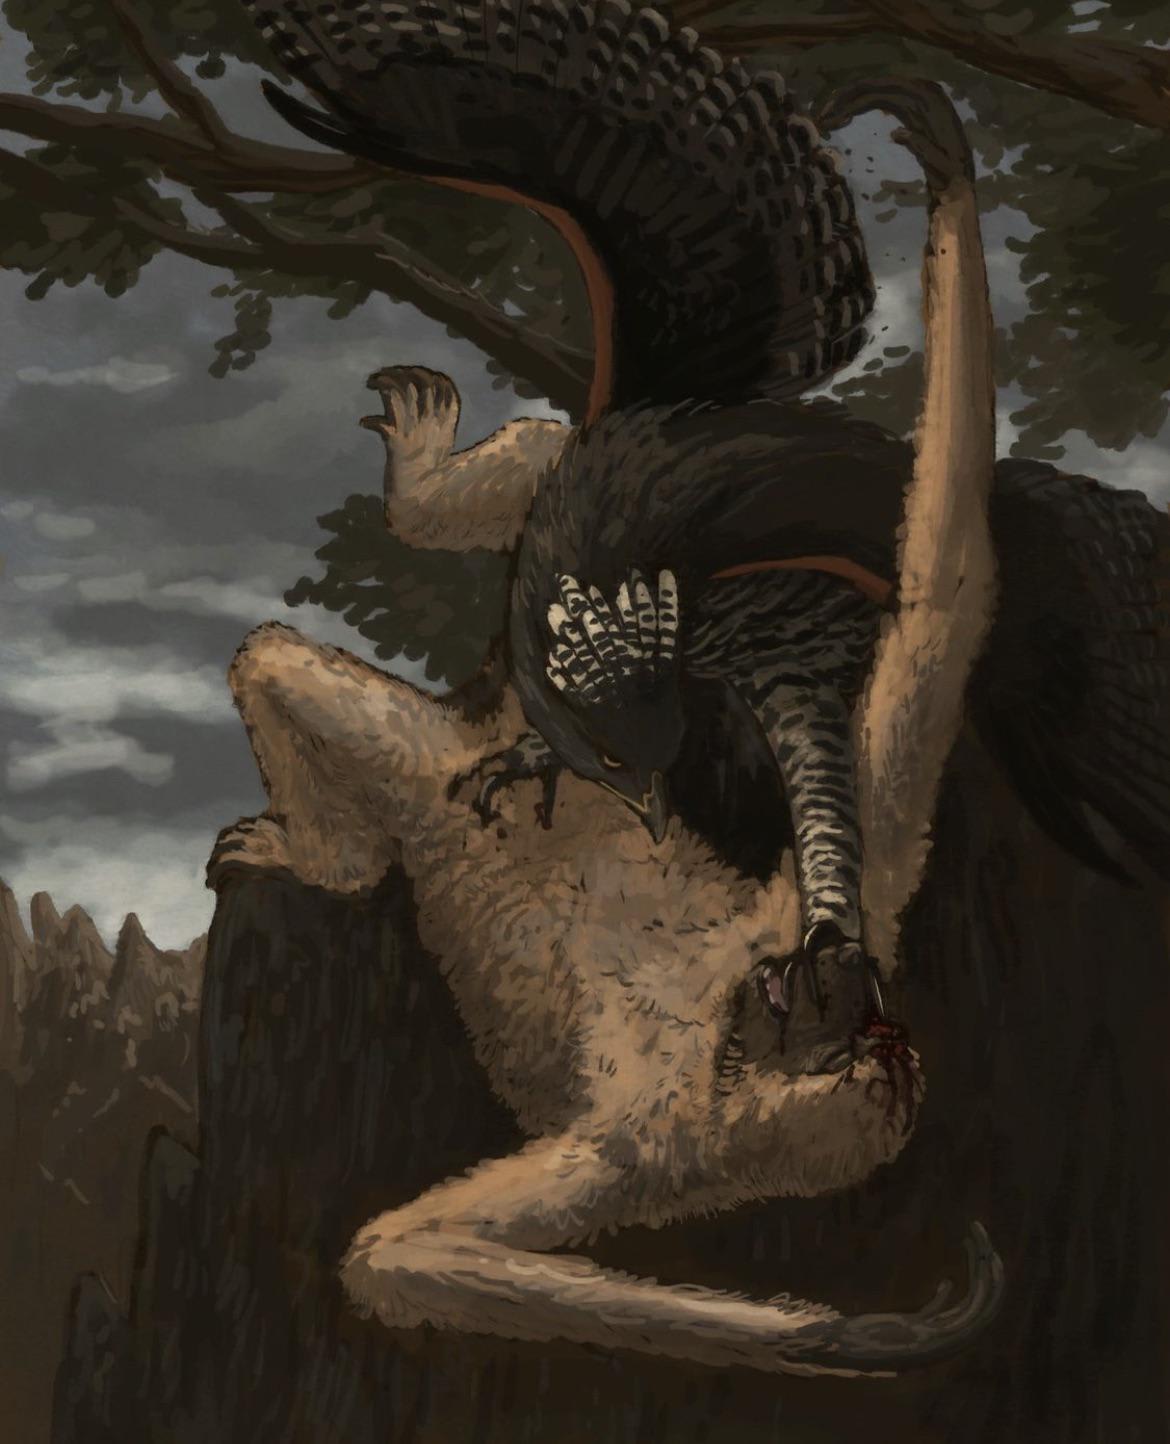 A Malagasy crowned eagle making a meal out of a giant sloth lemur, Palaeopropithecus